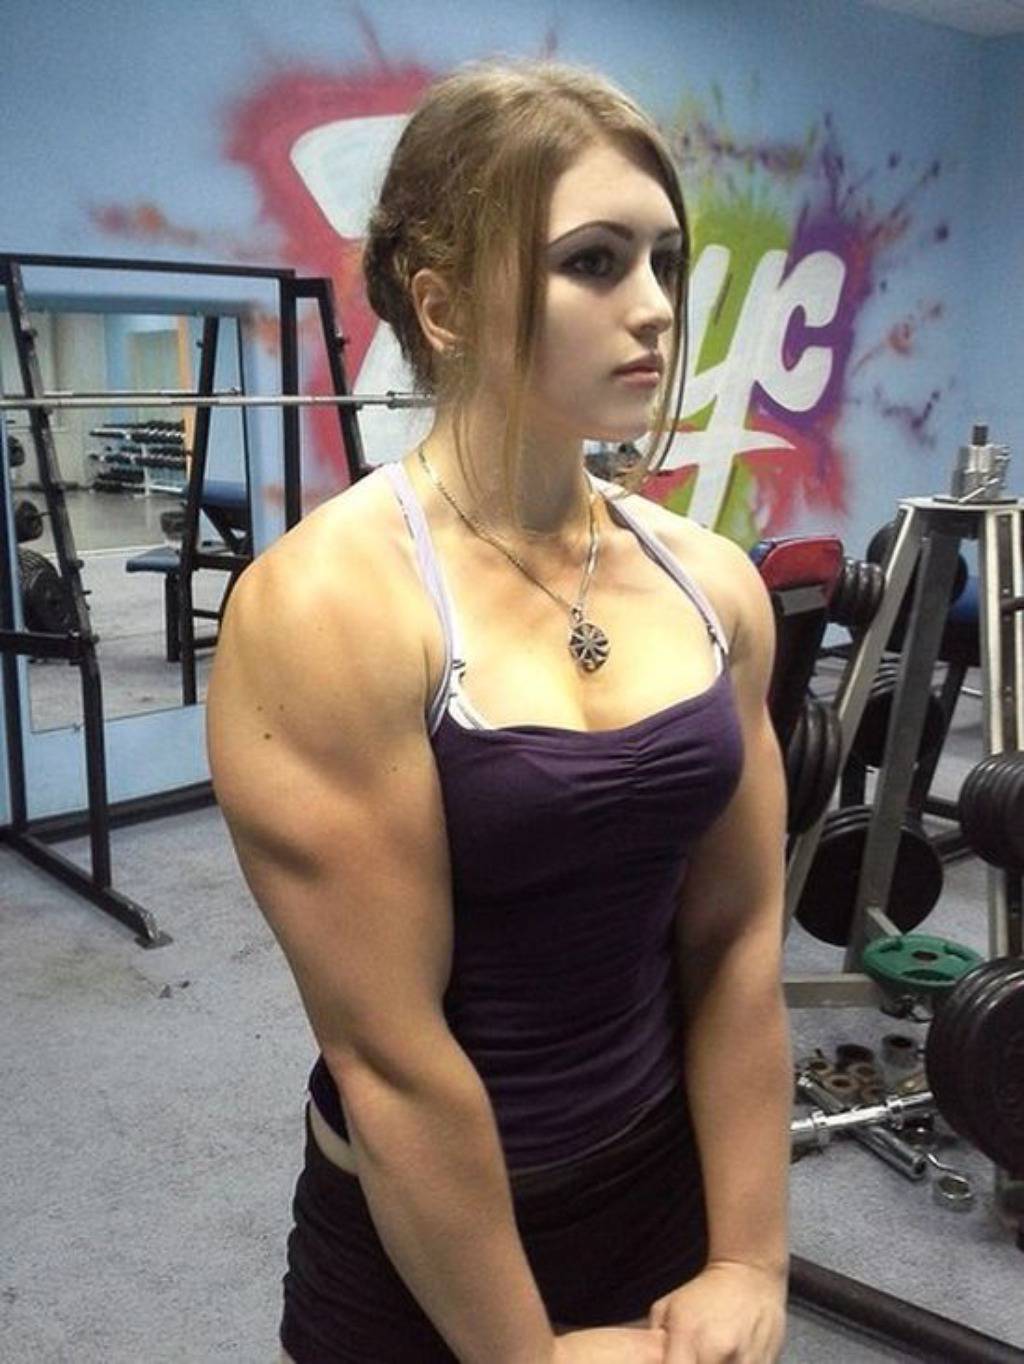 http://www.girlswithmuscle.com/